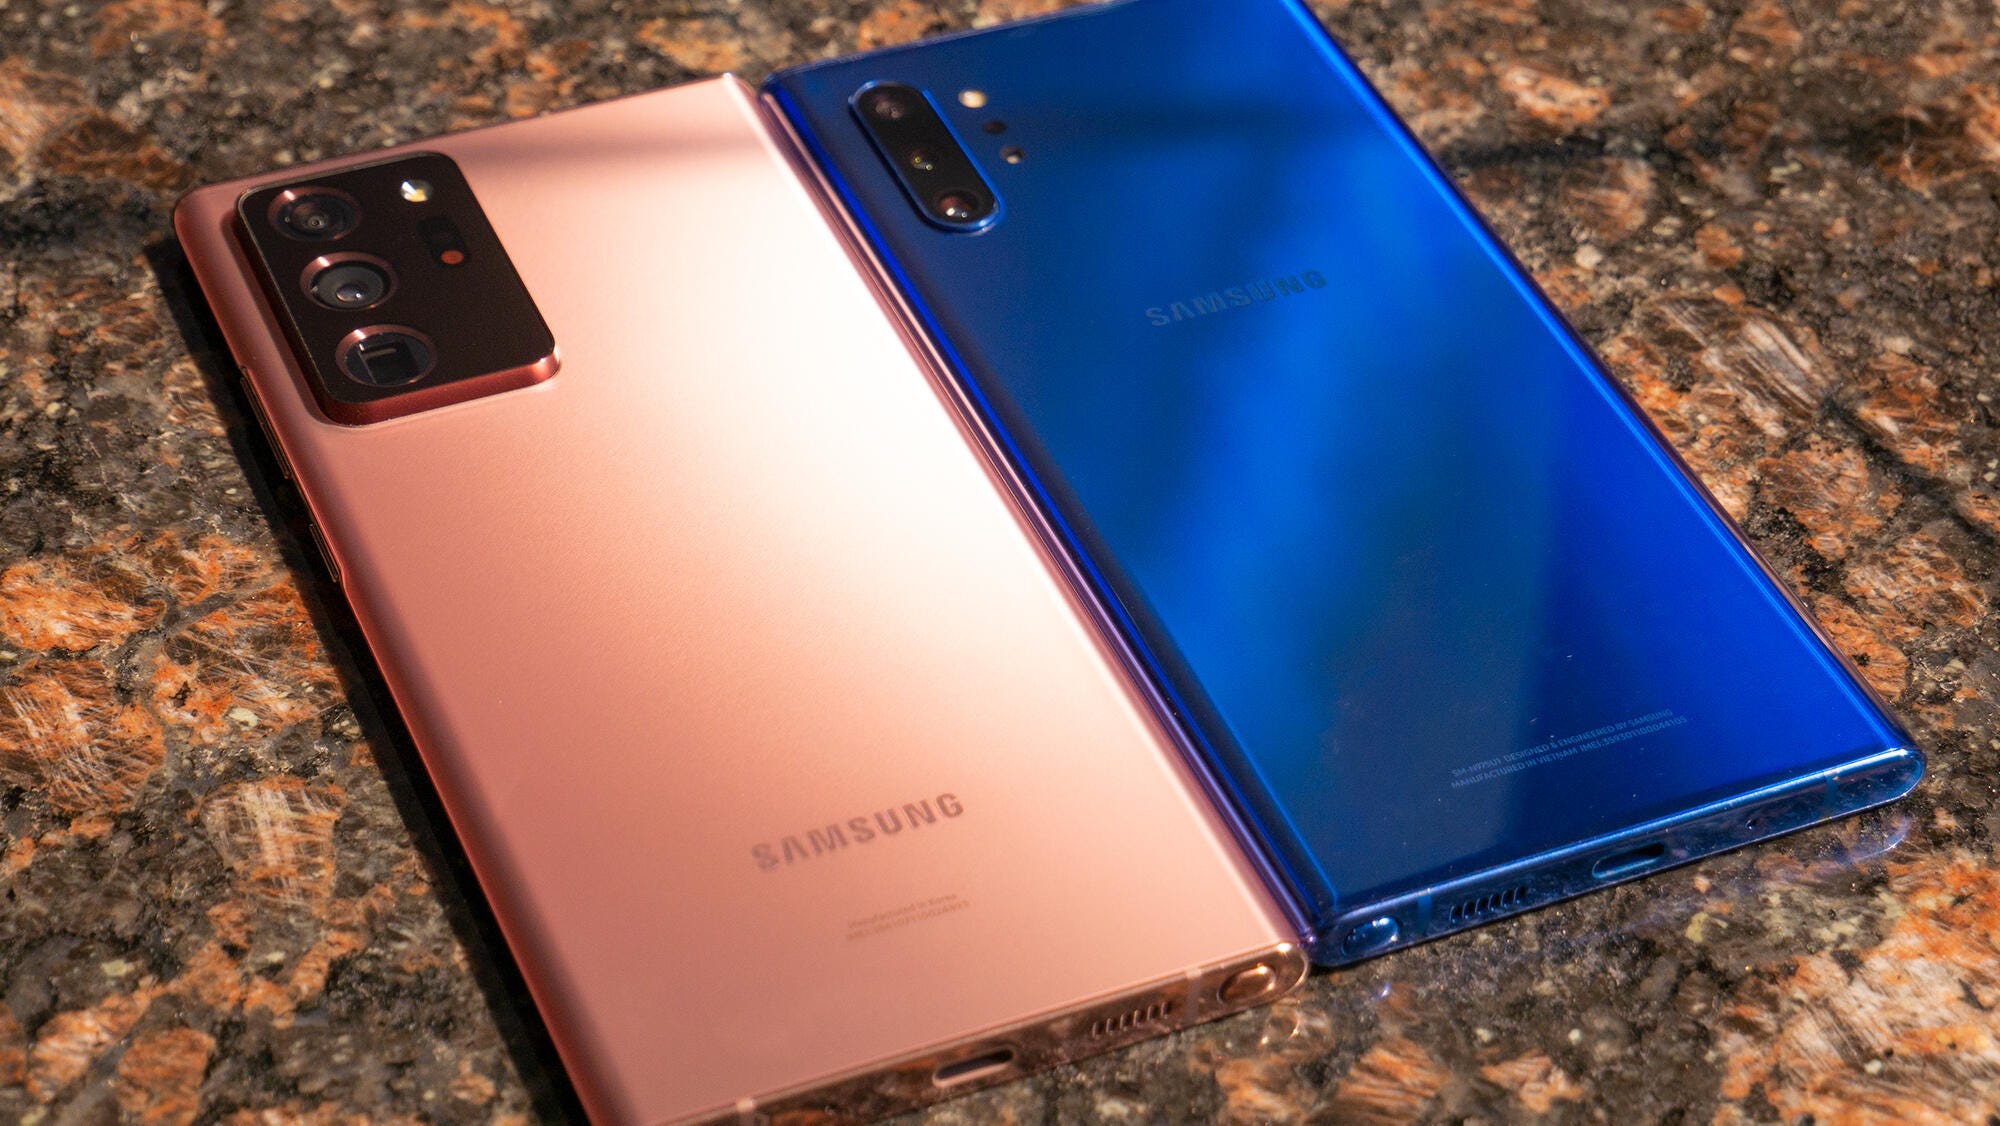 Samsung Galaxy Note 10 review: The best Galaxy phone to buy right now - CNET